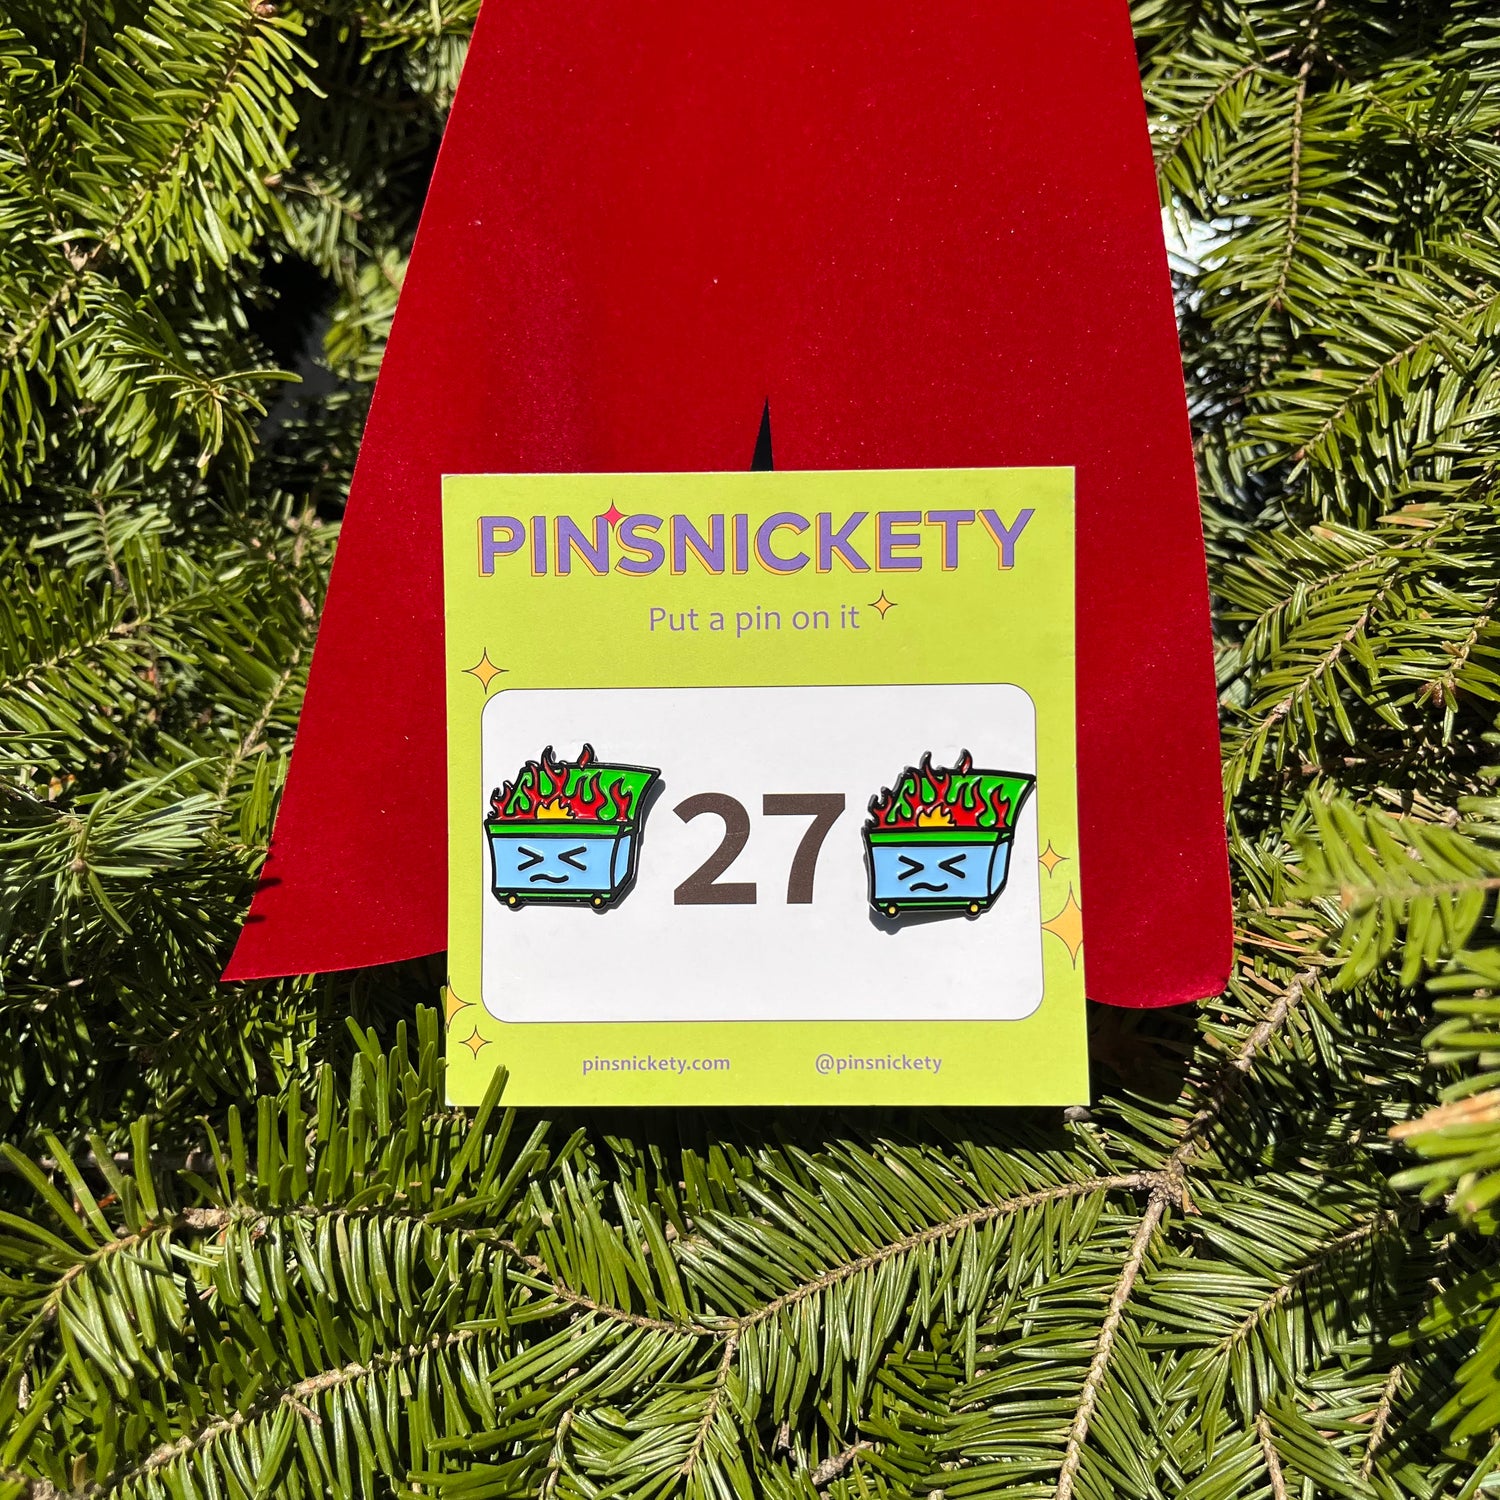 pinsnickety dumpster fire pins in front of a holiday wreath